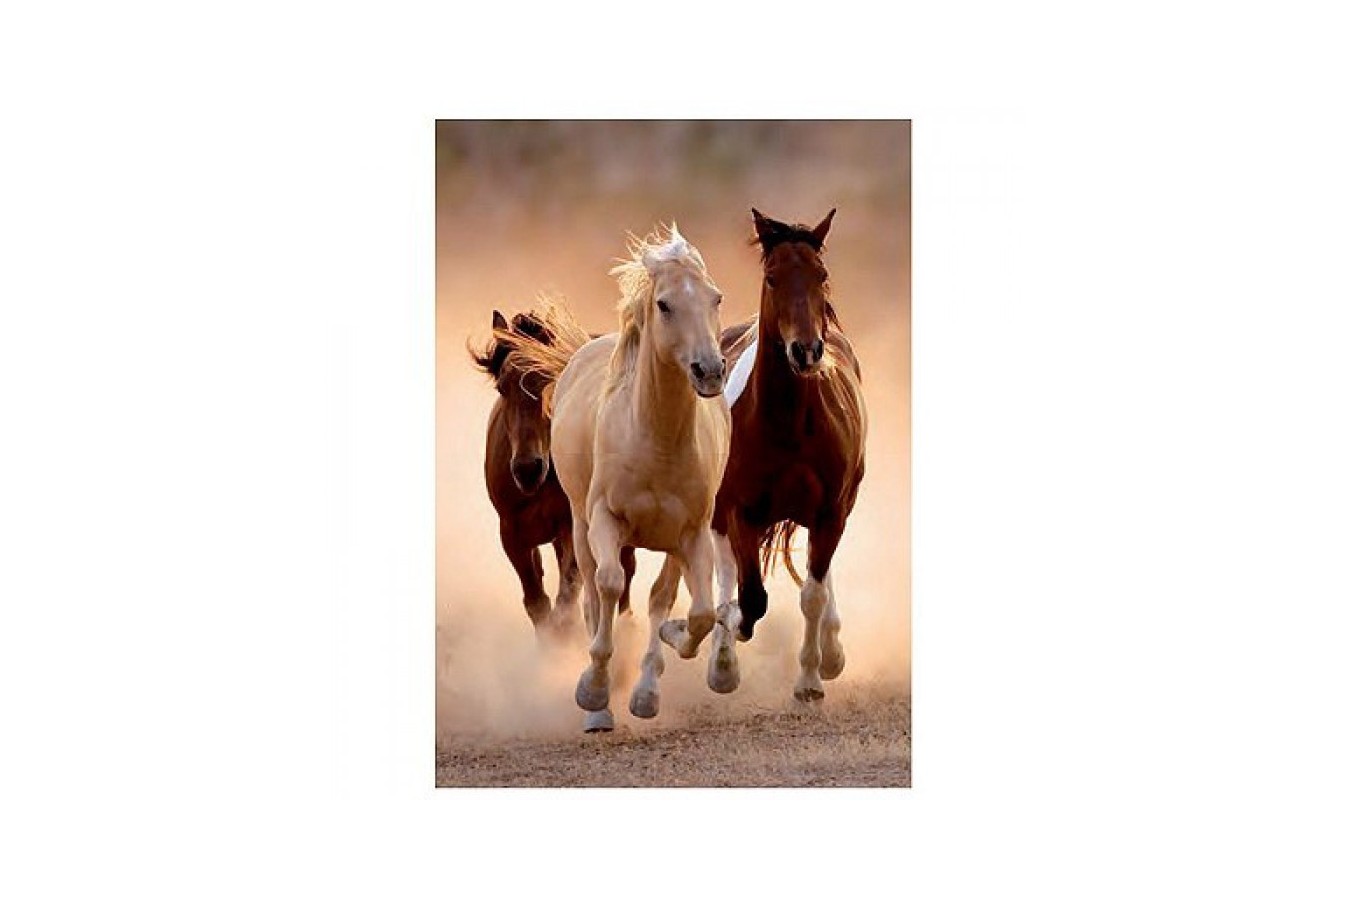 Puzzle Clementoni - Wild Horses Galloping, 1000 piese (6309)